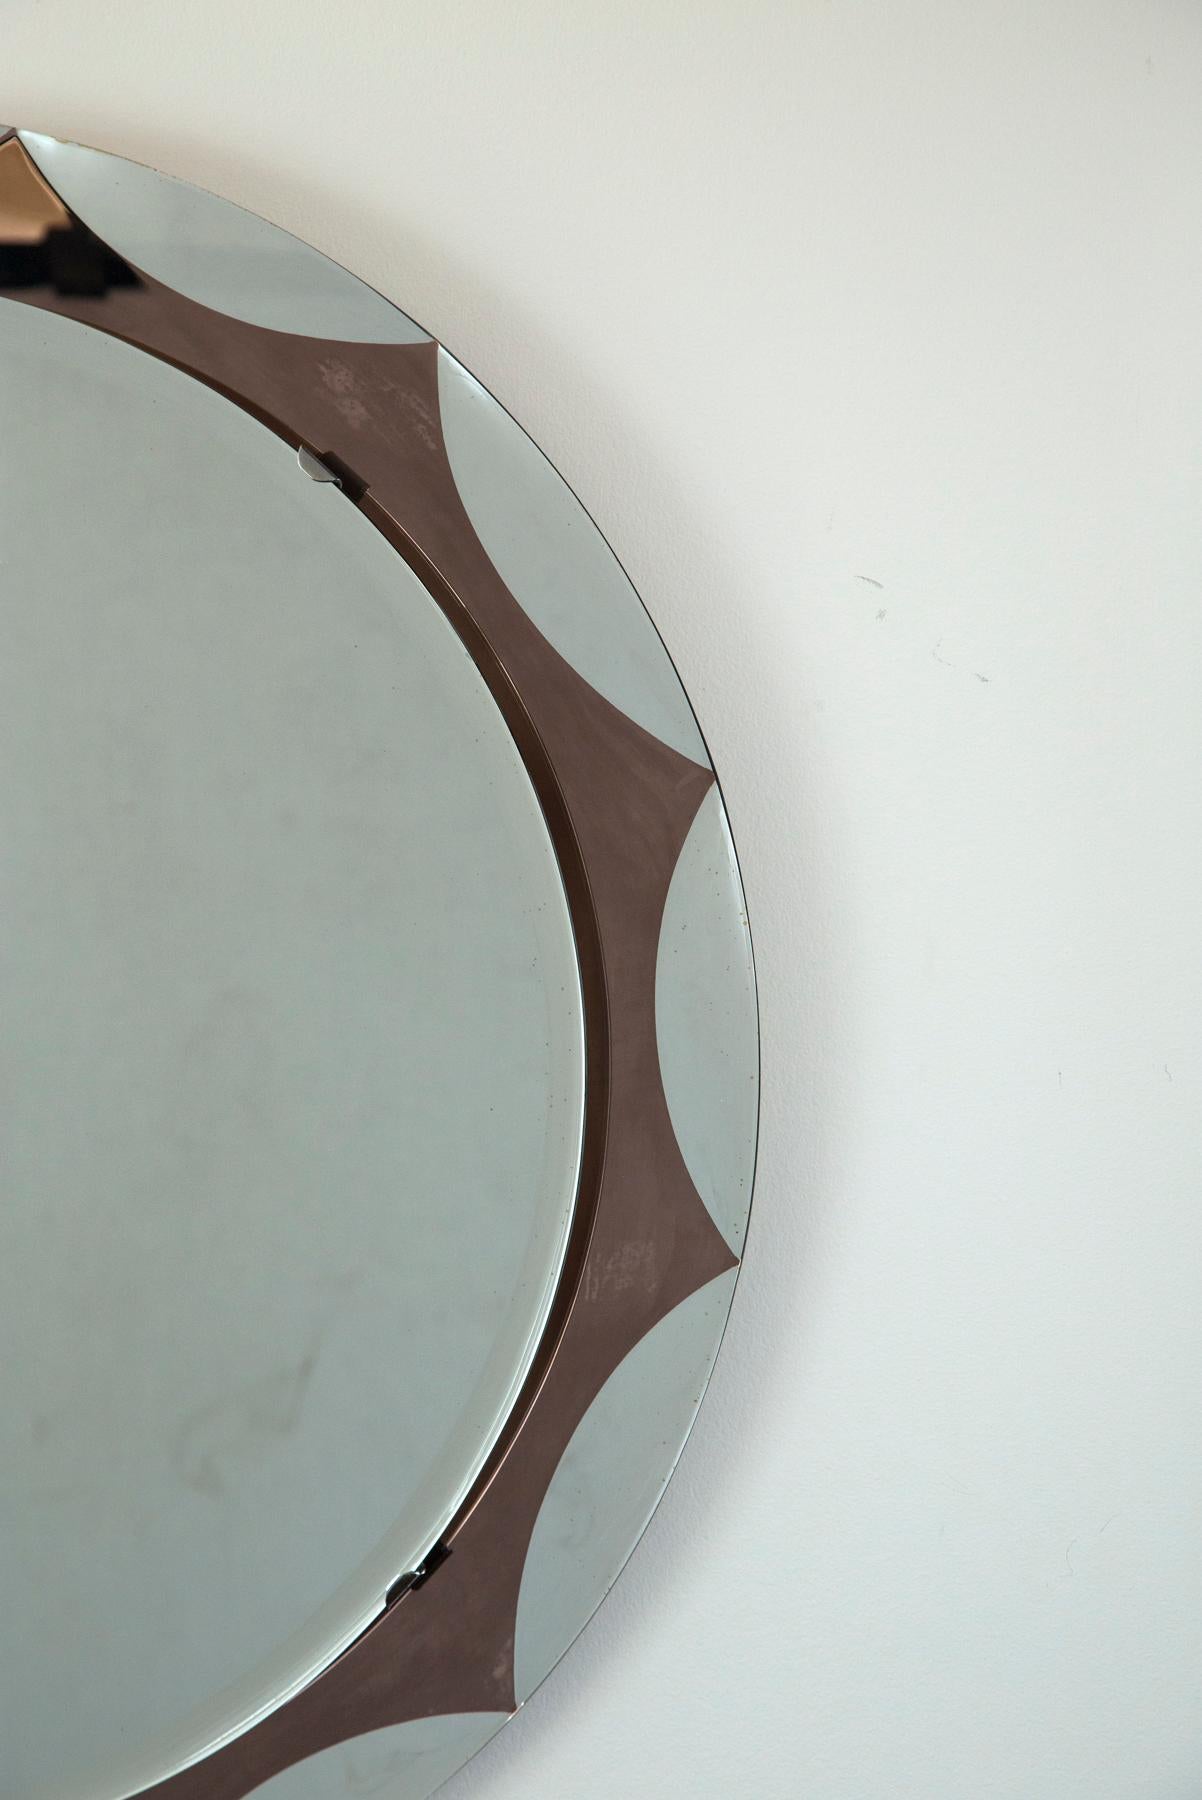 Lovely round floating mirror with burgundy colored starburst(scalloped) pattern, center floating mirror is beveled and attached with nickel clips, shown with original sticker by manufacturer on back of mirror
Place of origin
Siena, Italy
Date of